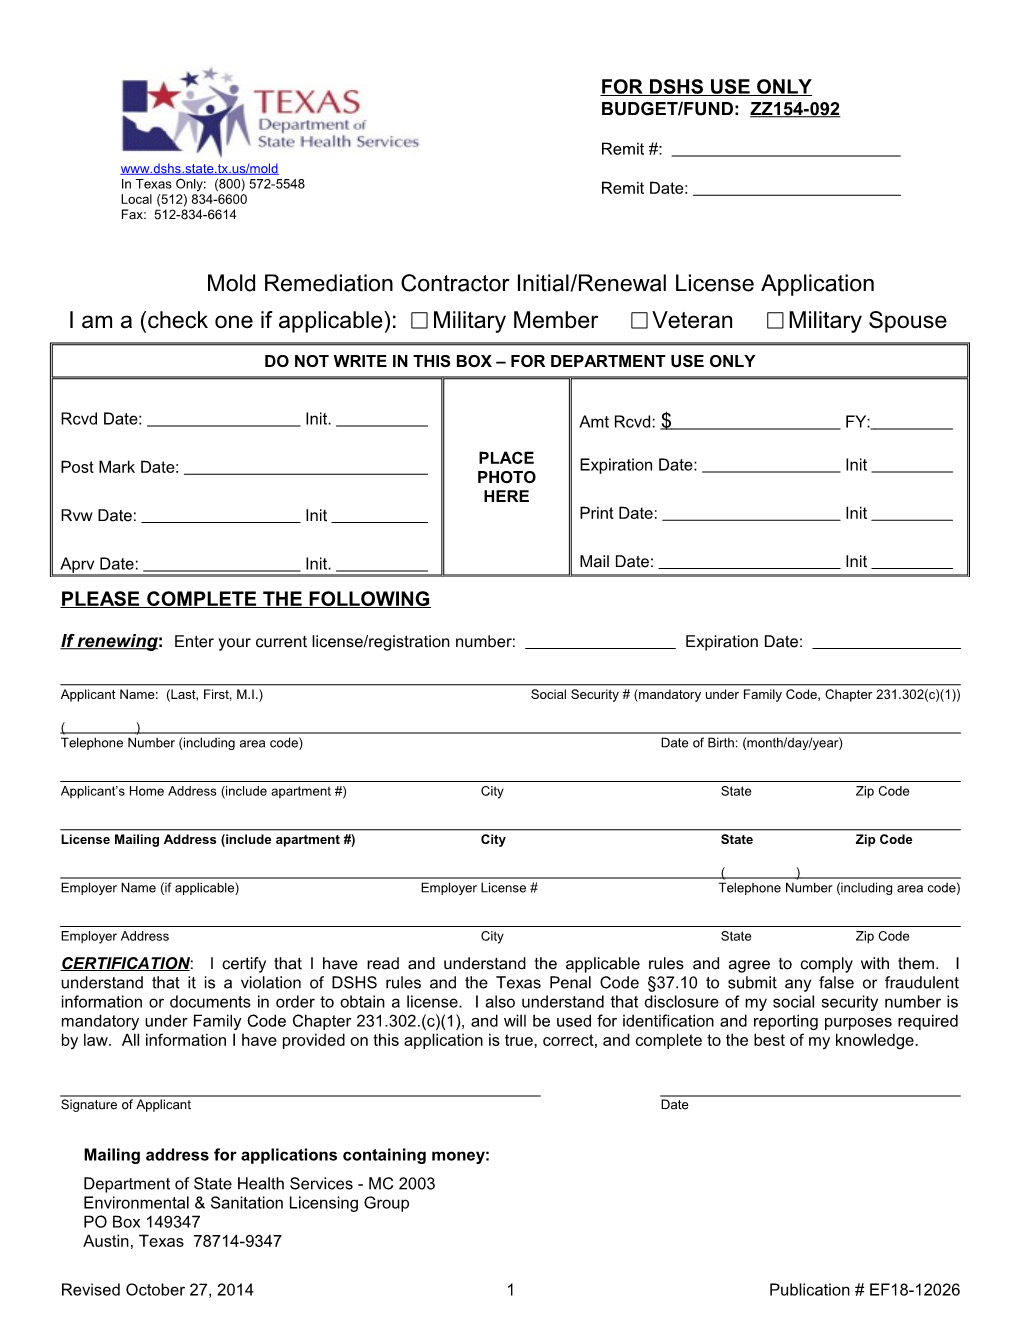 Mold Remediation Contractor Initial/Renewal License Application